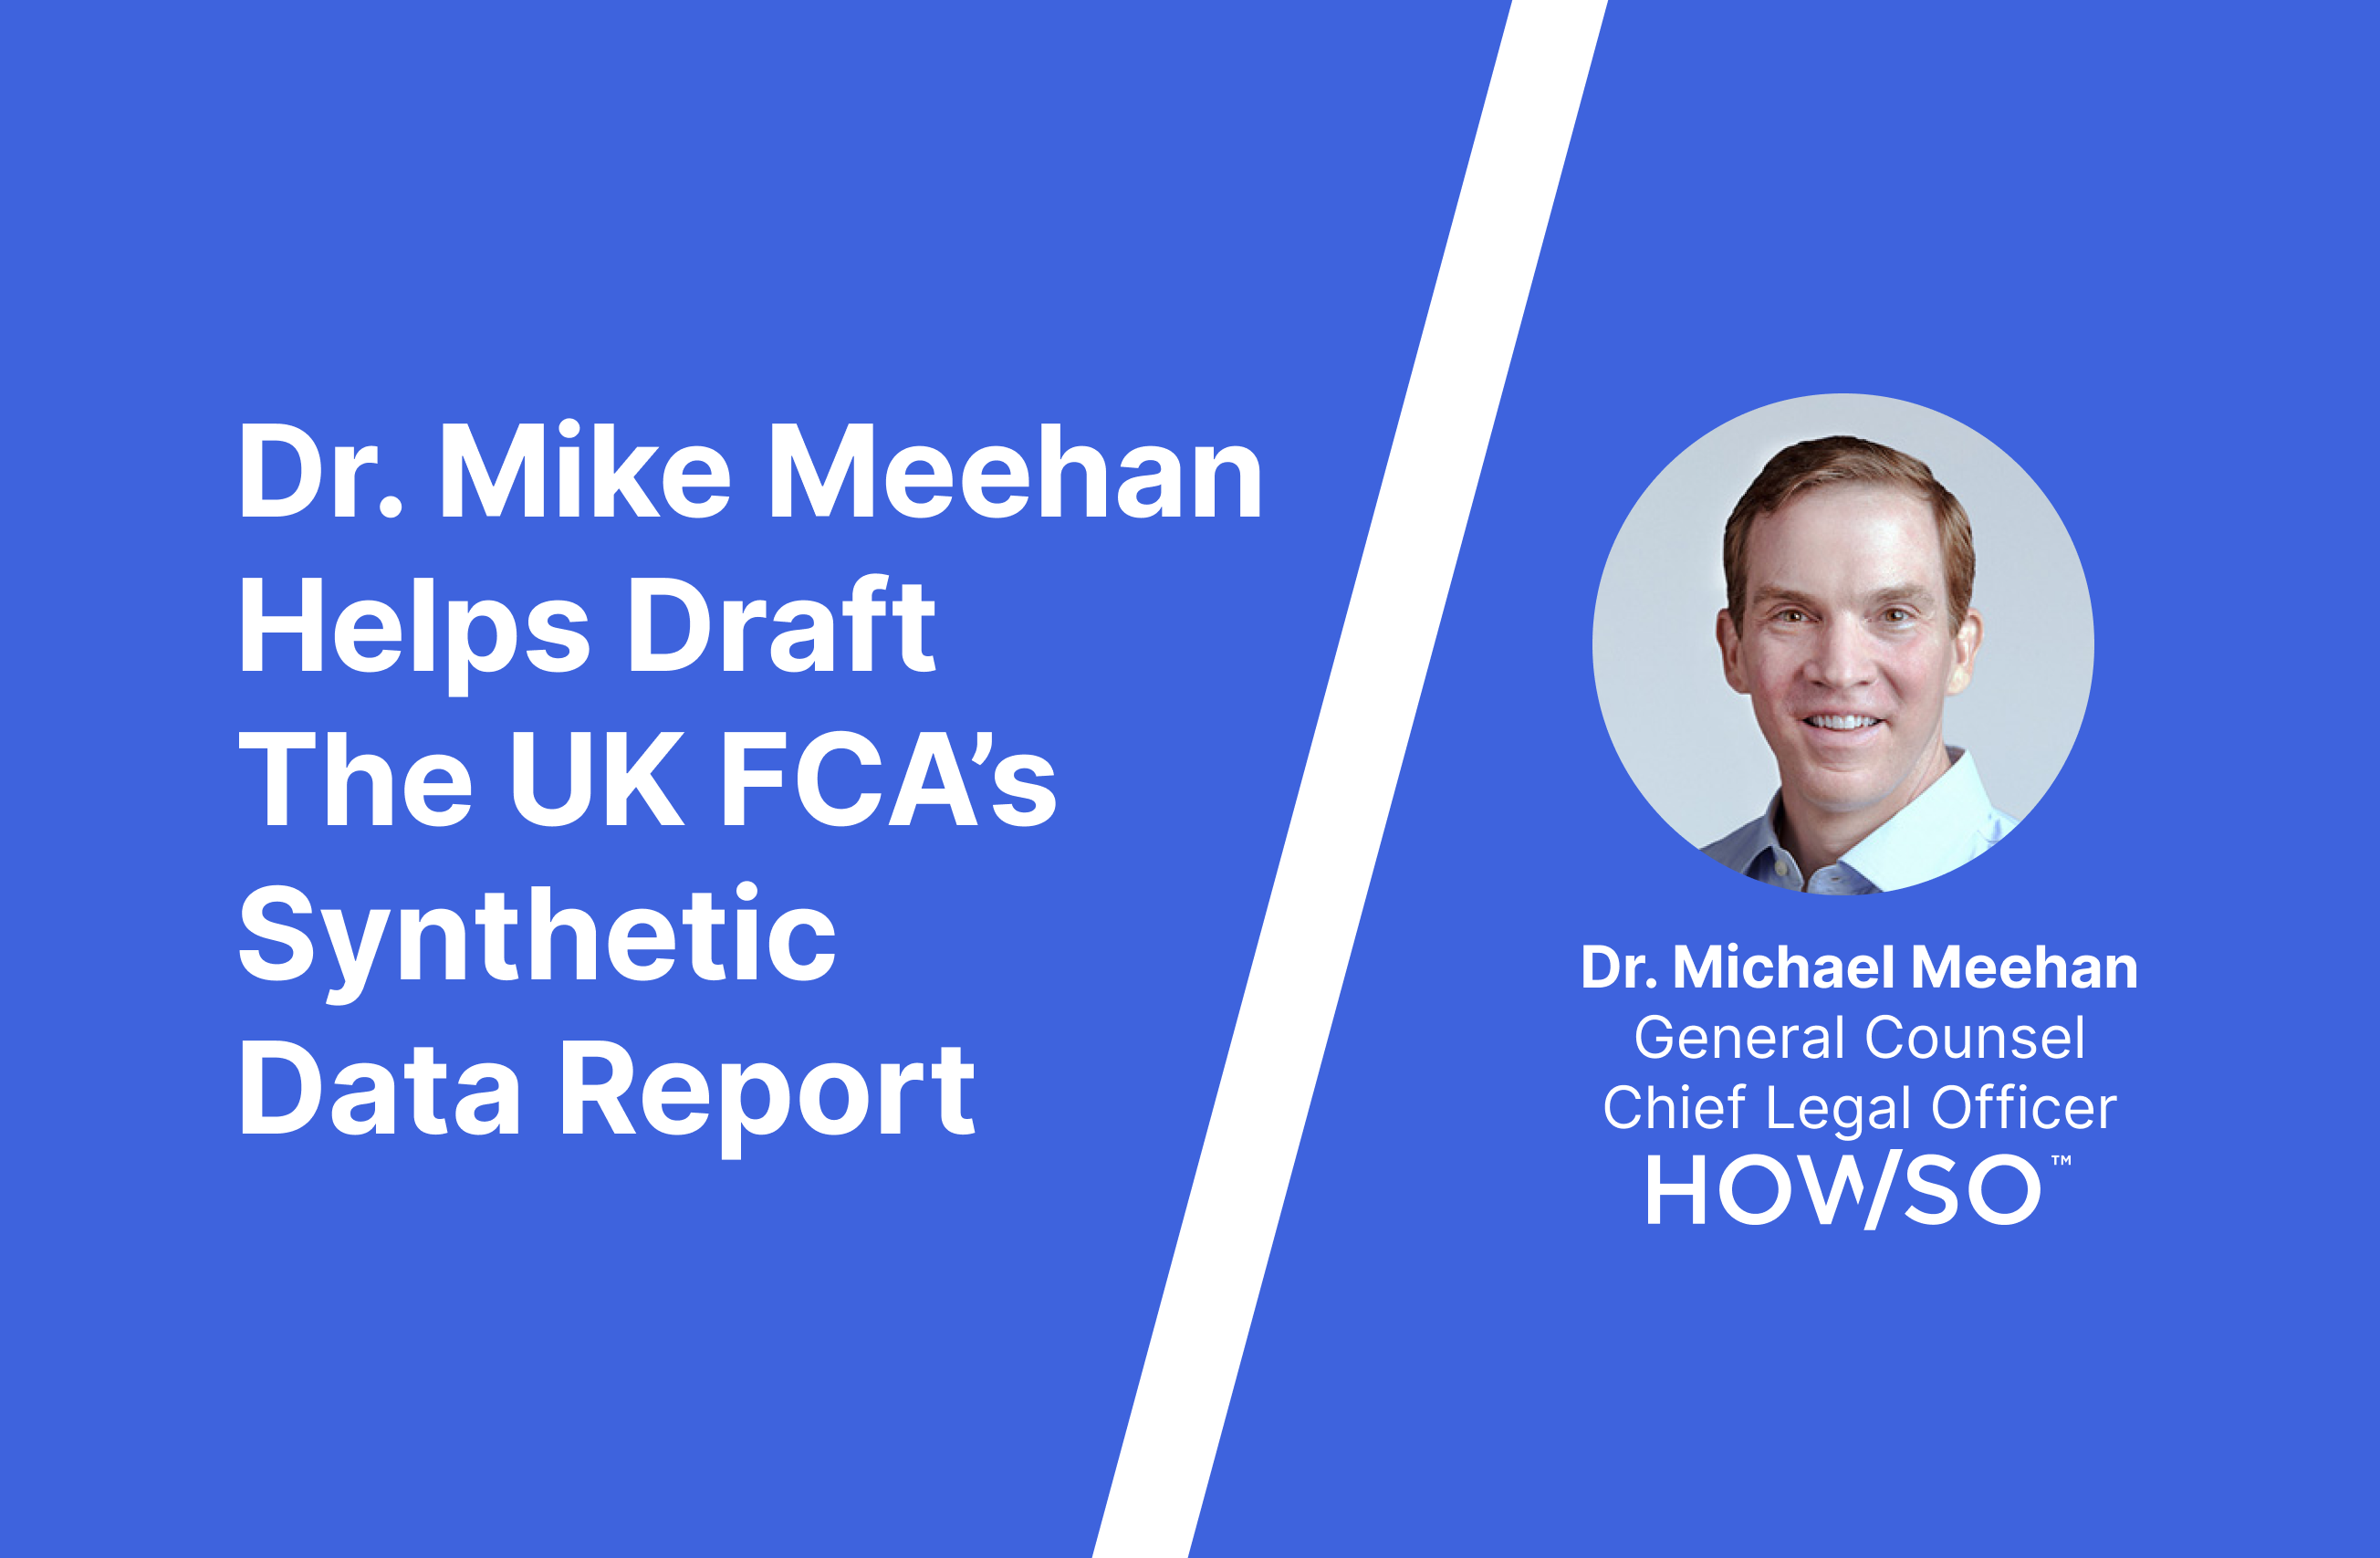 Howso’s Dr. Mike Meehan Helps Draft The UK FCA’s Synthetic Data Report